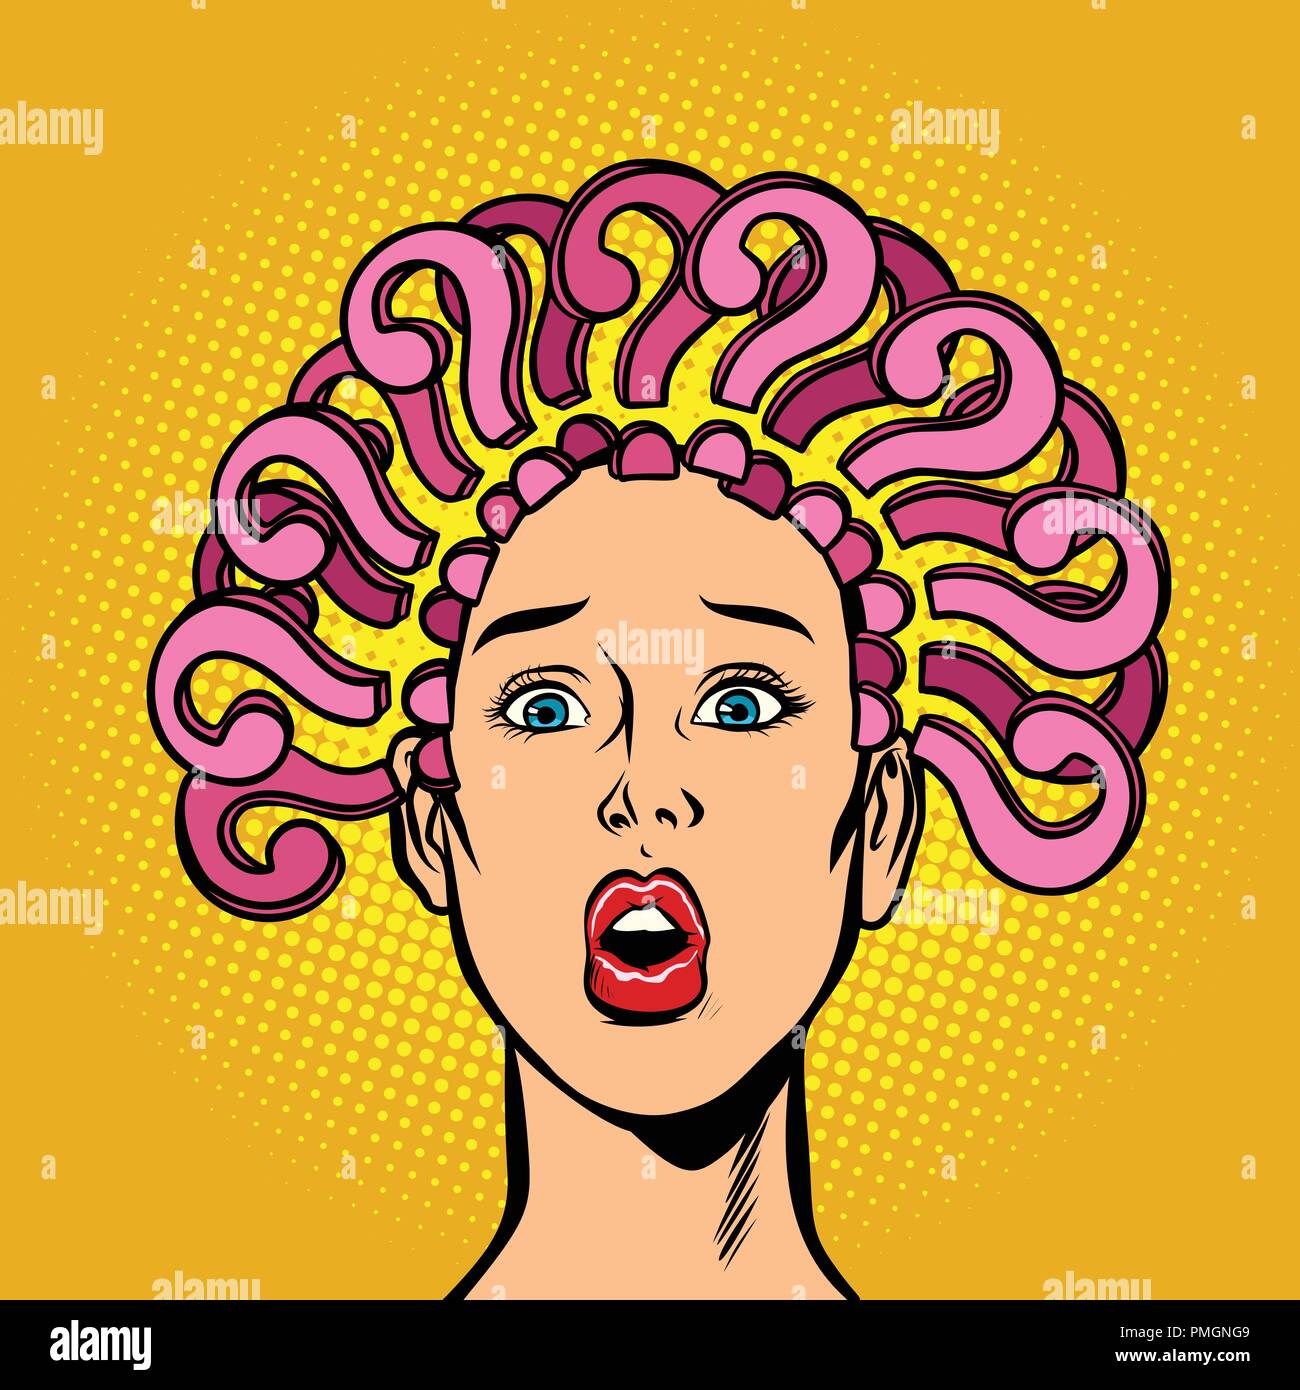 question mark, hair on the head, surprised woman Stock Vector